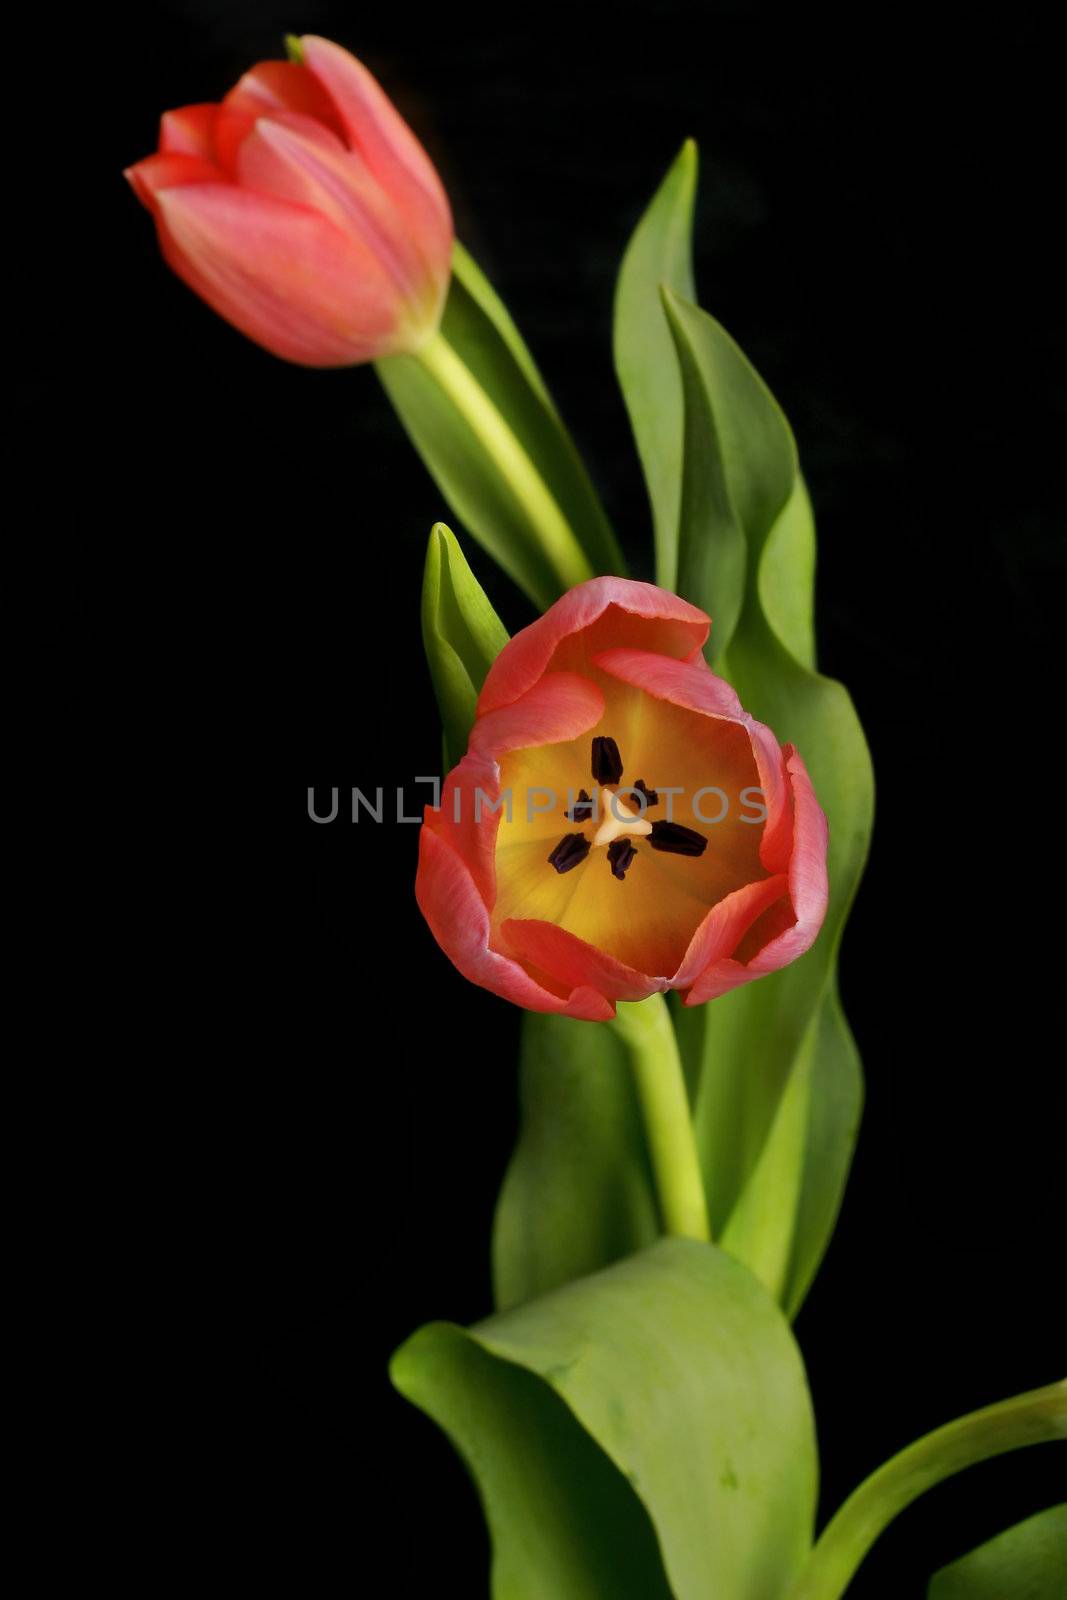 Two beautiful tulips entwined